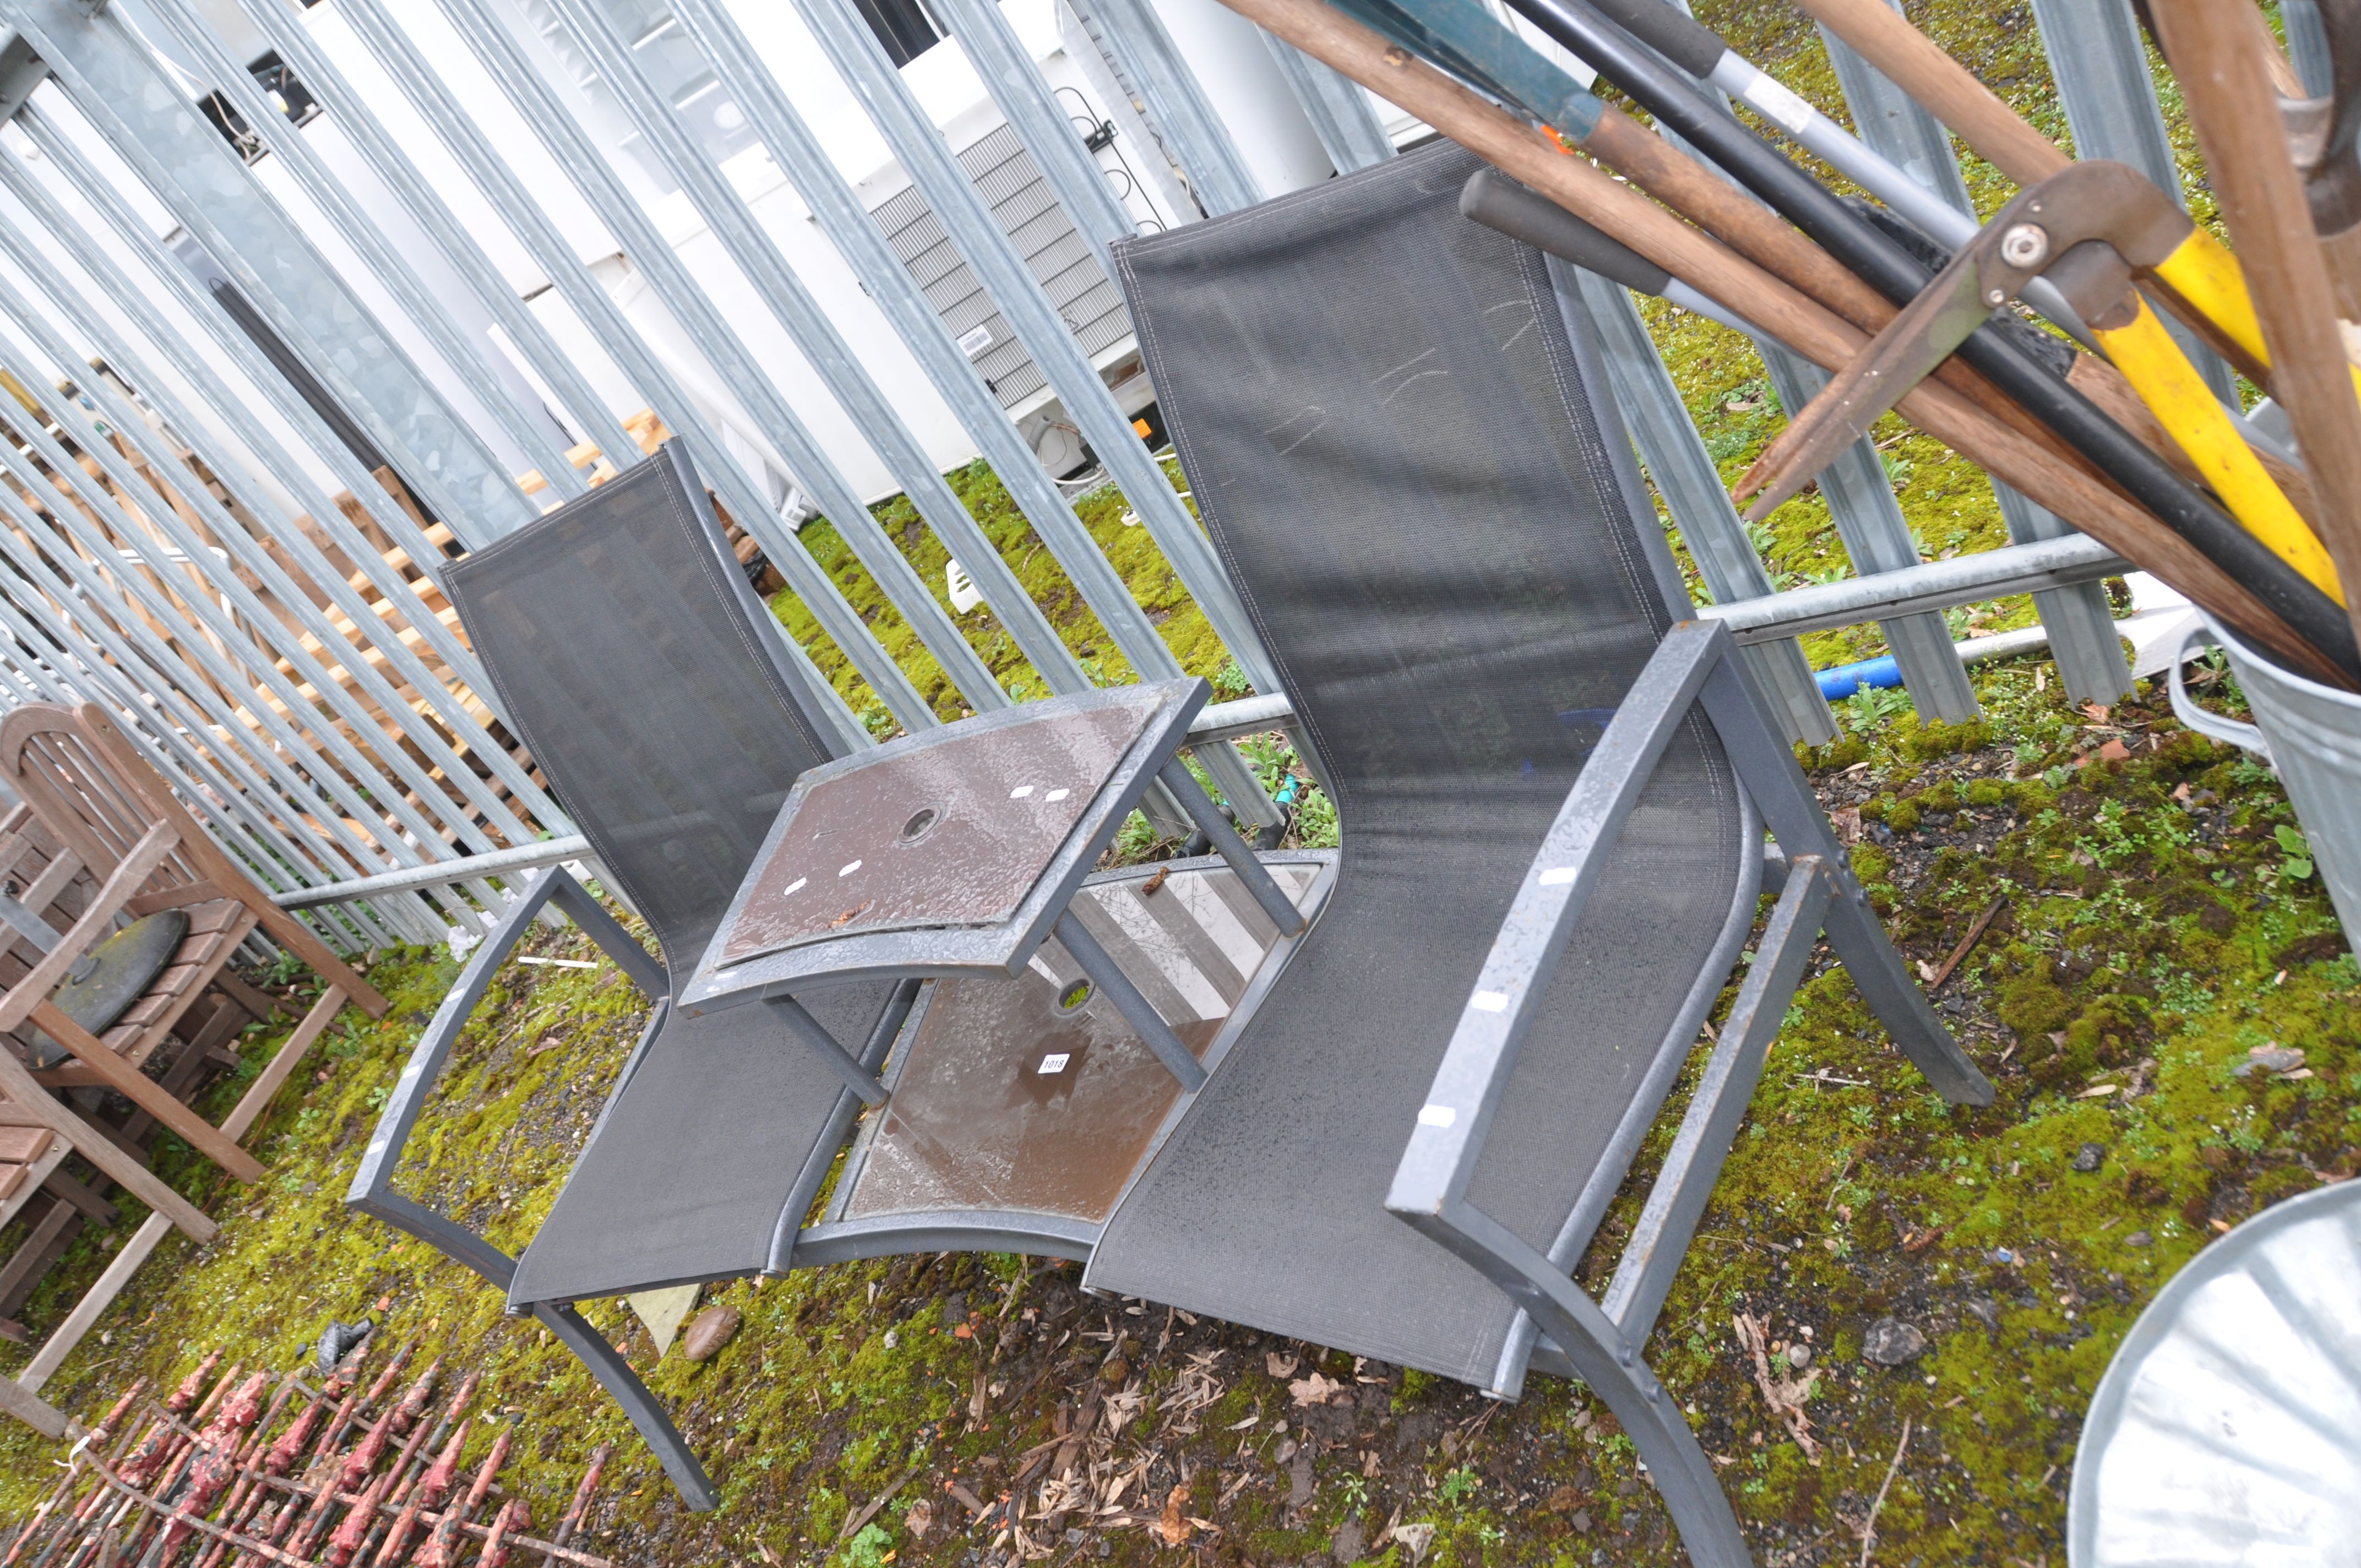 A MODERN METAL GARDEN SEAT WITH CENTRAL GLAZED TABLE width 155cm